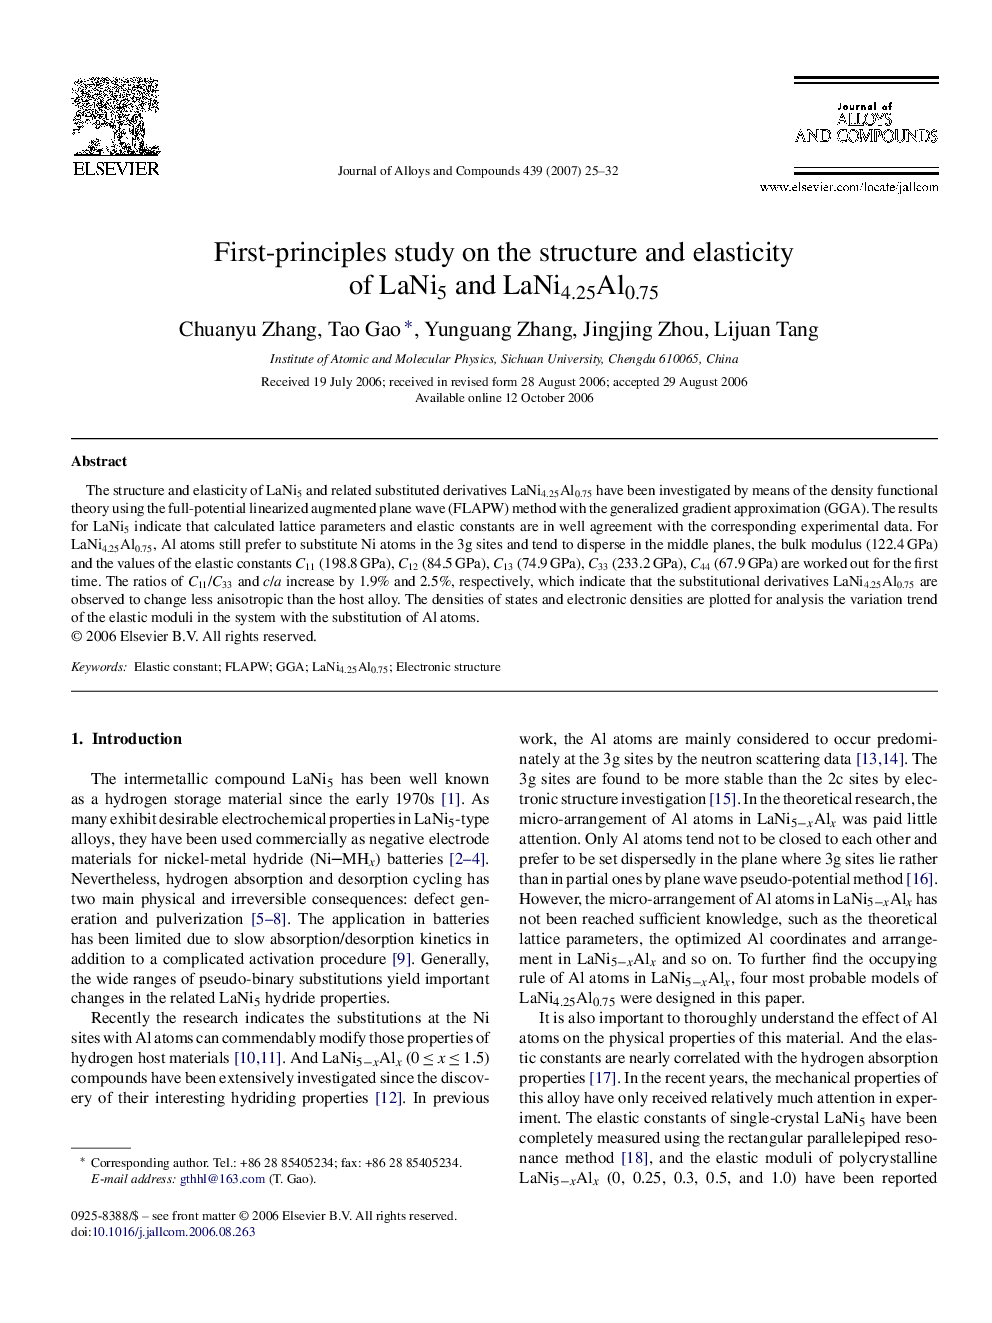 First-principles study on the structure and elasticity of LaNi5 and LaNi4.25Al0.75